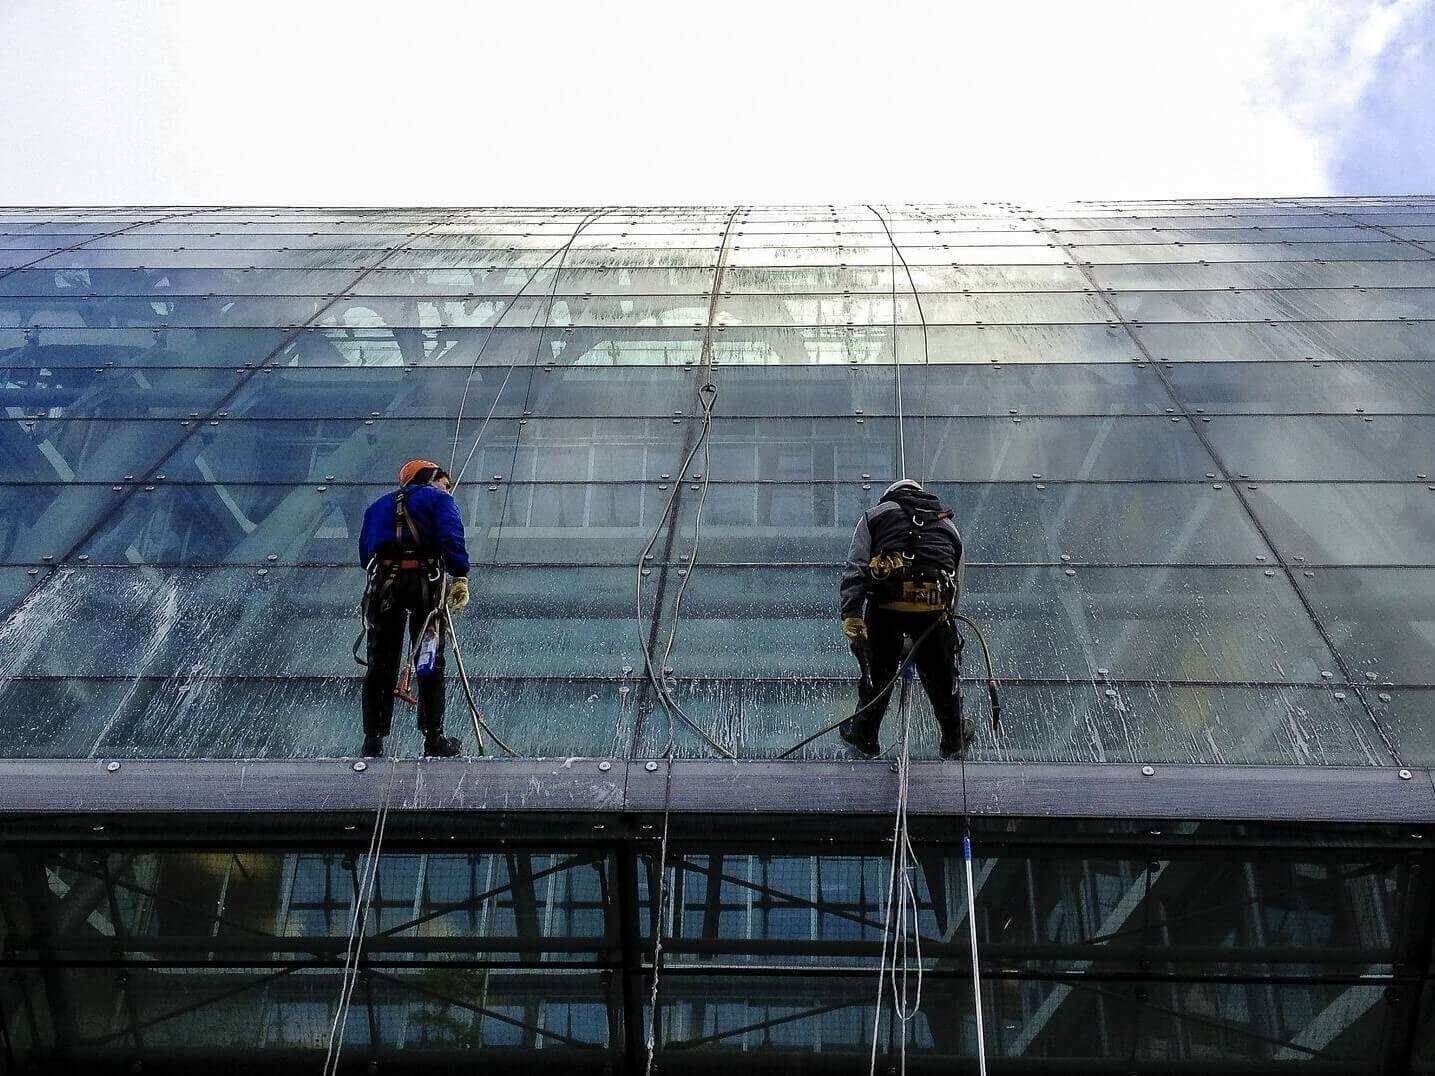 two men wash windows at height using ropes performing window cleaning service at height